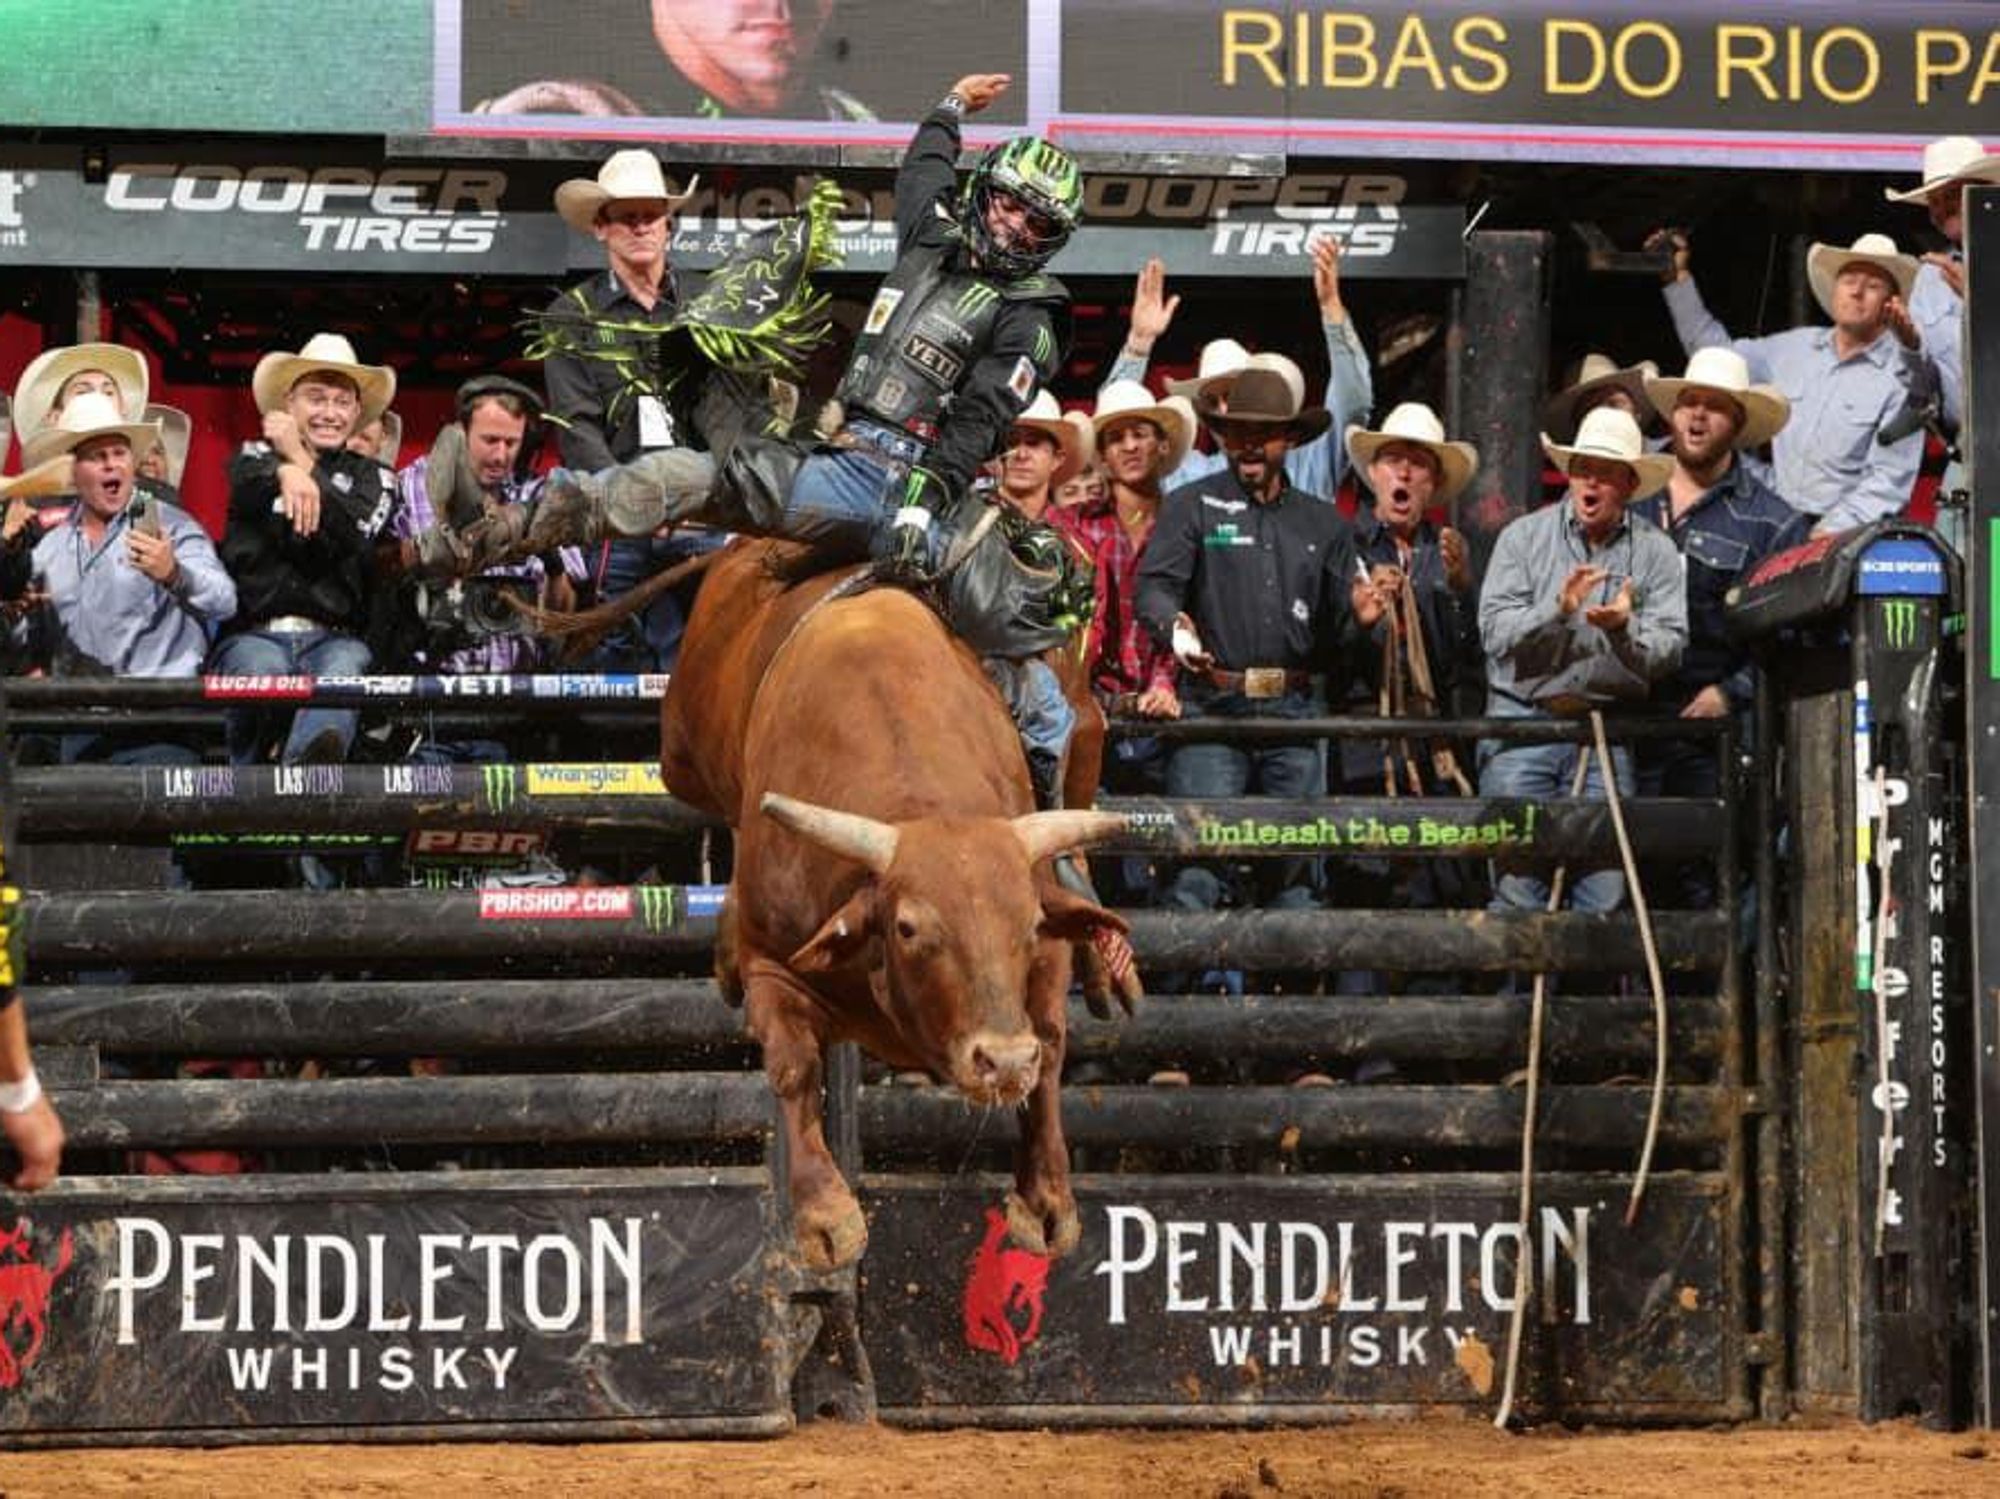 The new Professional Bull Riding league is guaranteed to be a wild ride.